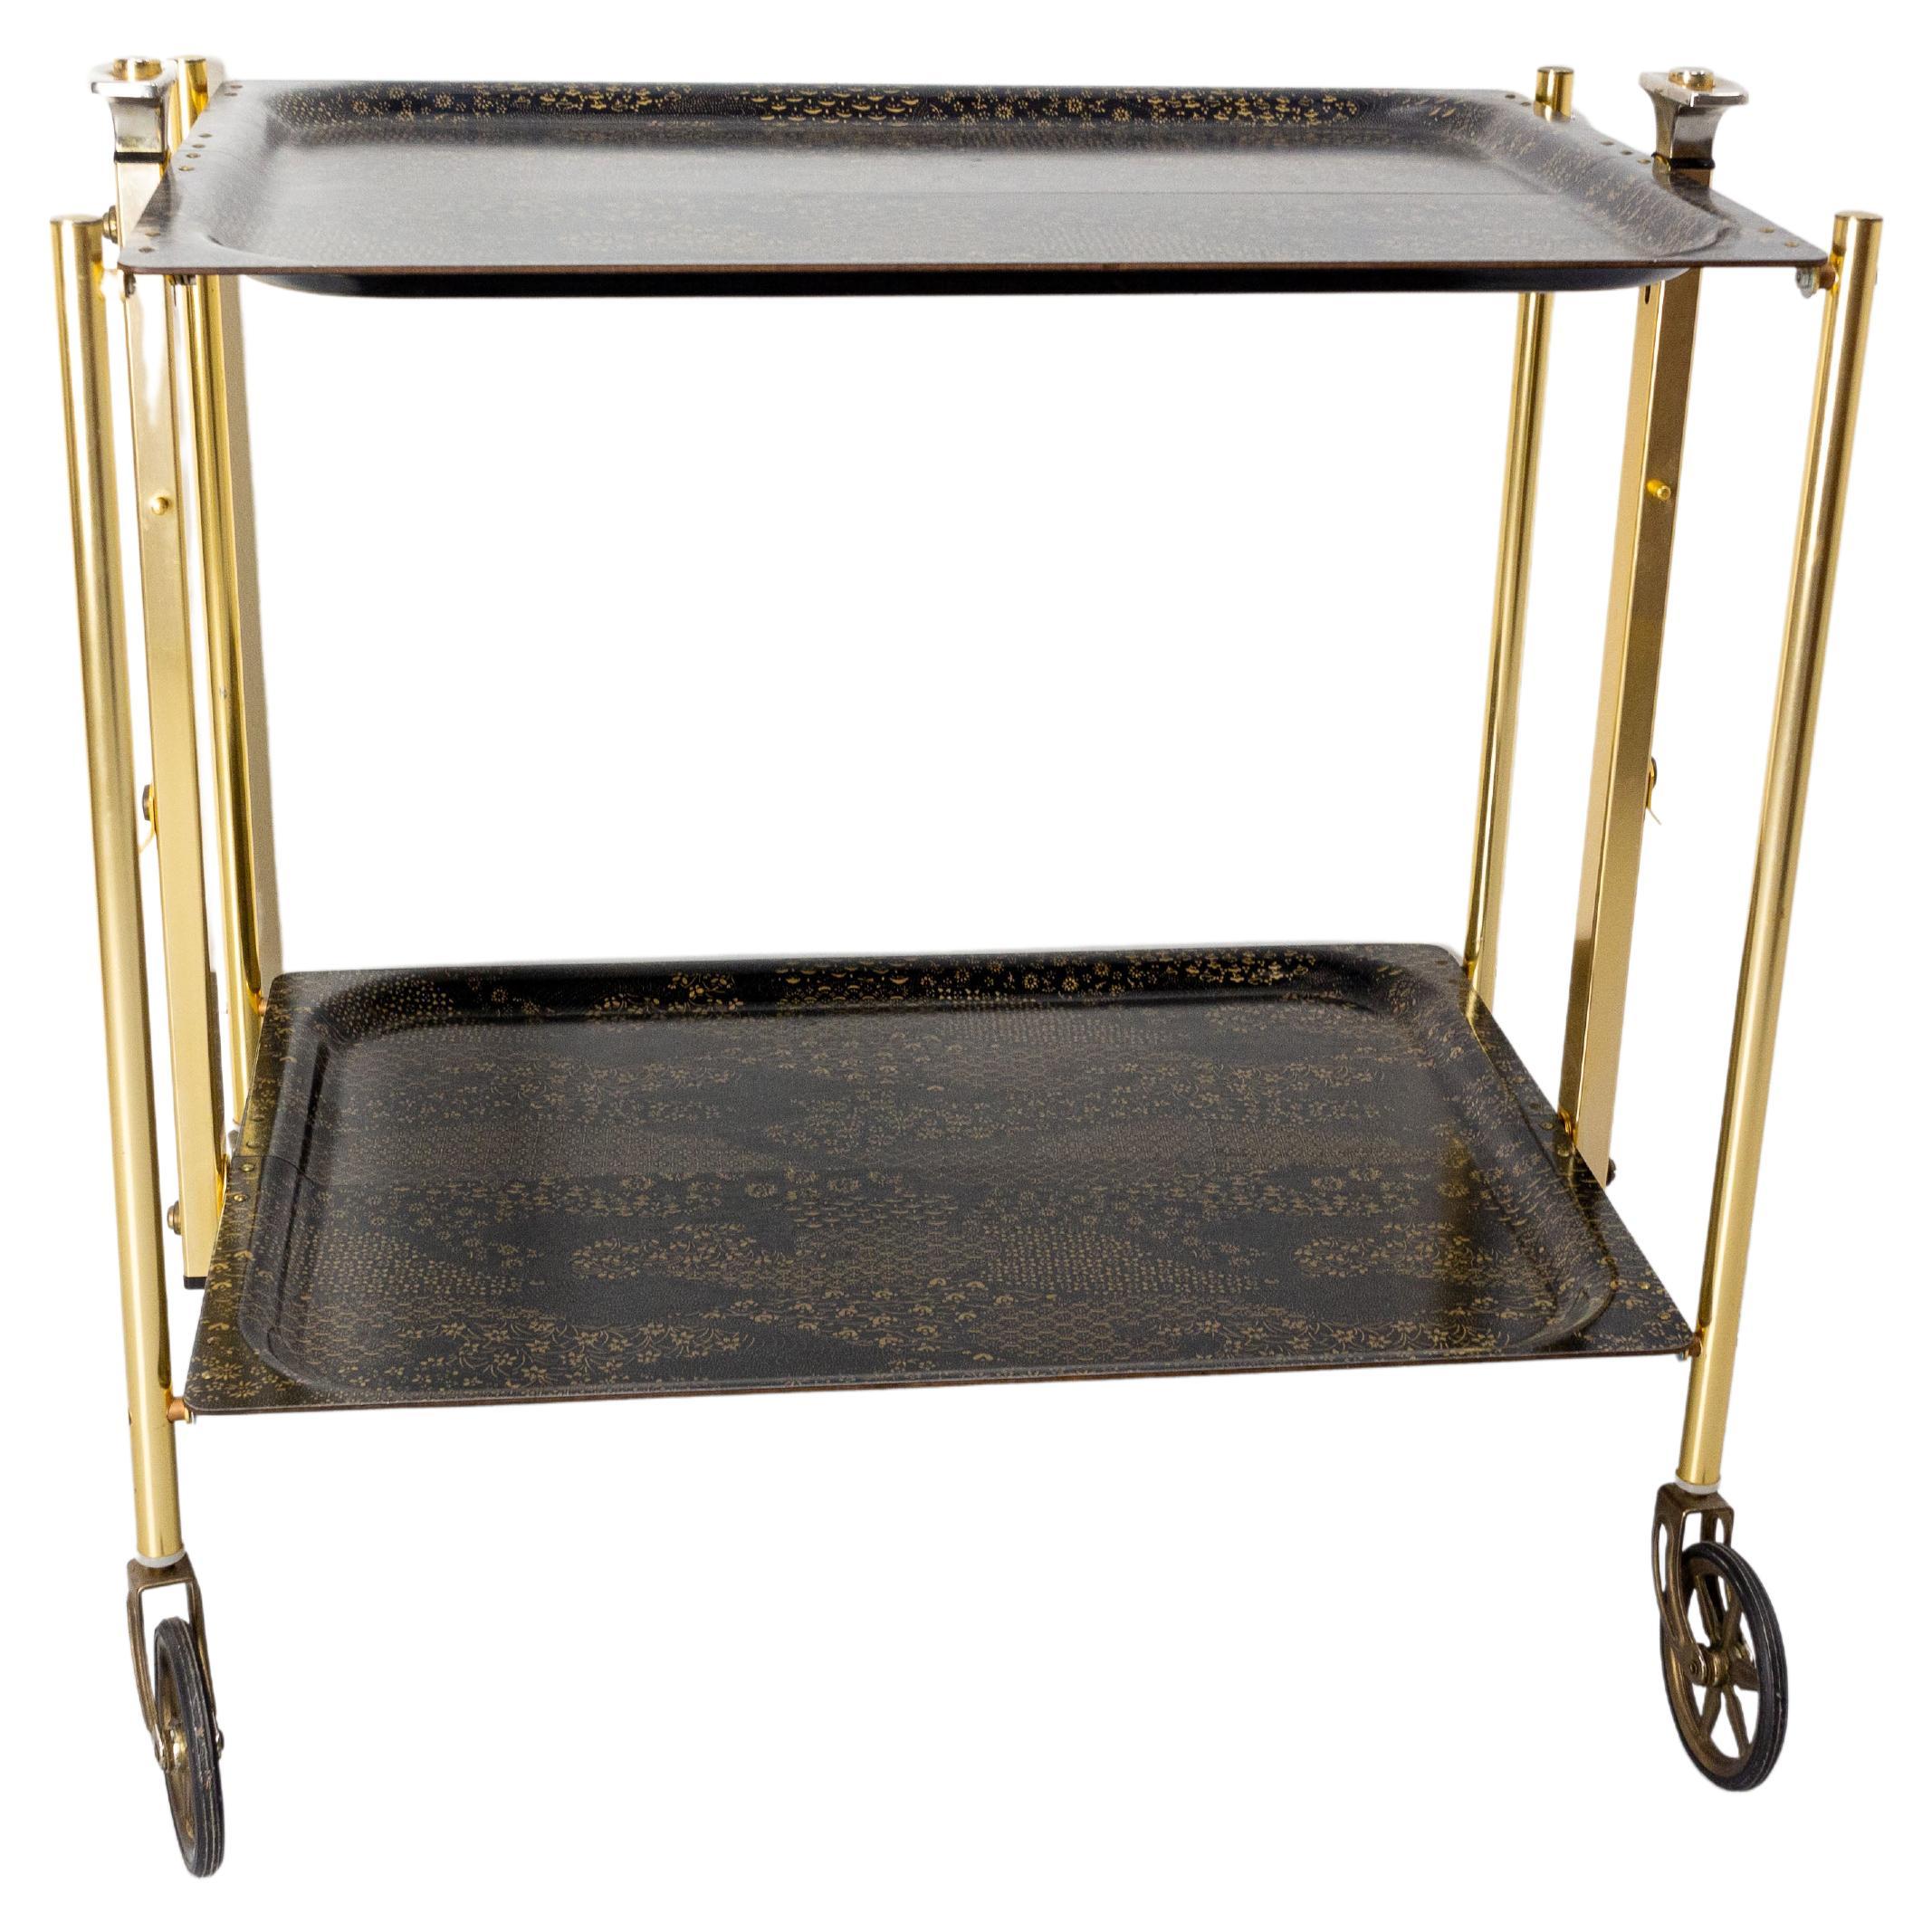 Black and golden serving trolley folding bar cart drinks midcentury, circa 1960s.
This serving trolley can also be used as a side table.
In very good working order.
Very versatile, practical and light.
Very easy to fold.
Very good vintage